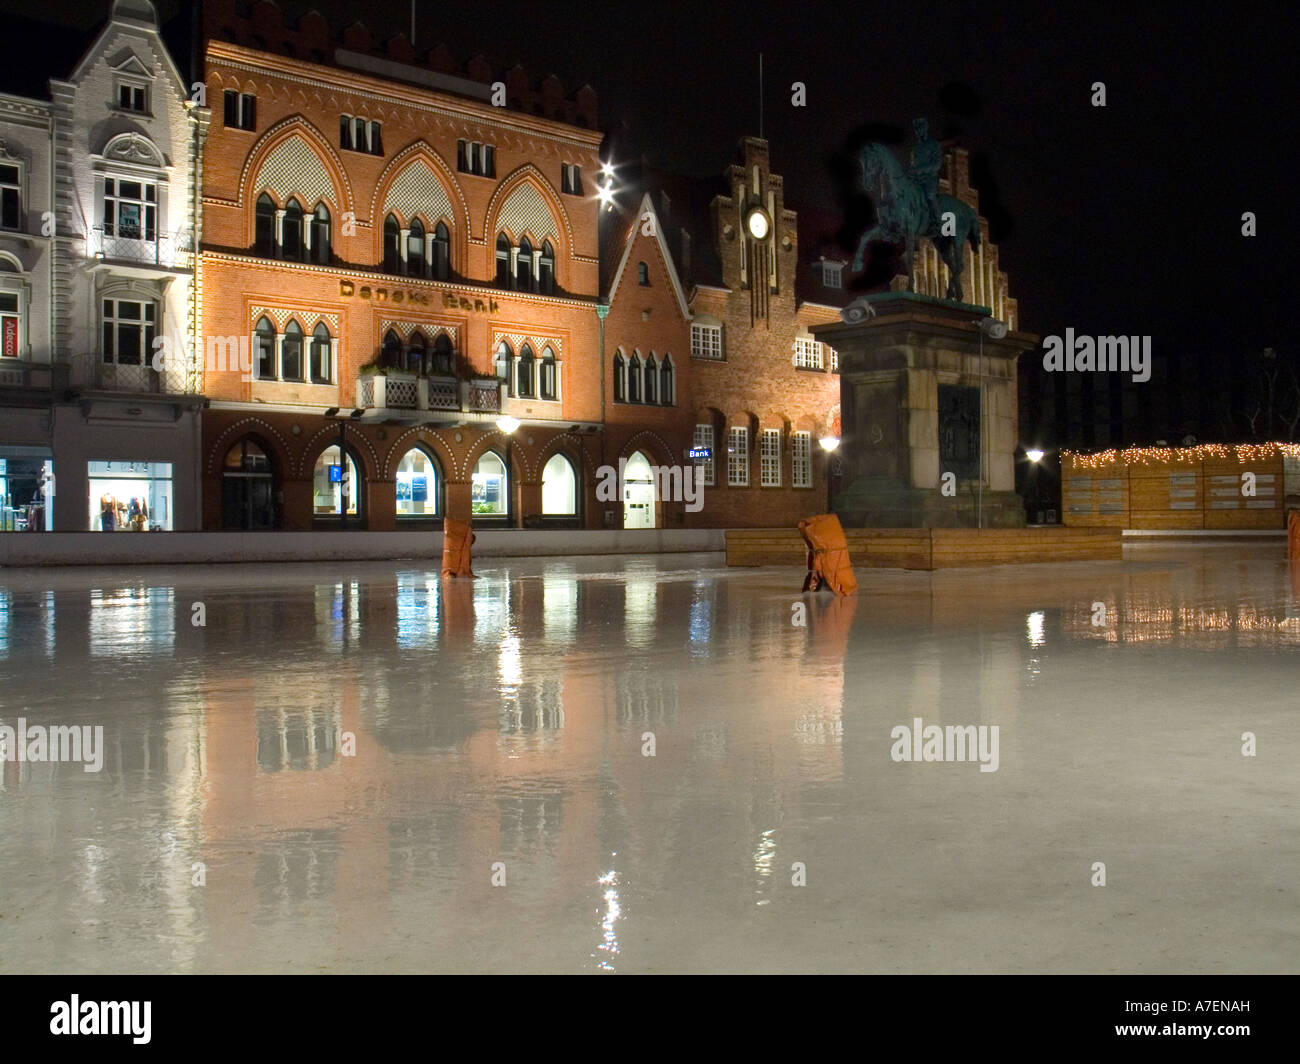 Denmark Esbjerg Town Square with Ice Skating Rink Stock Photo